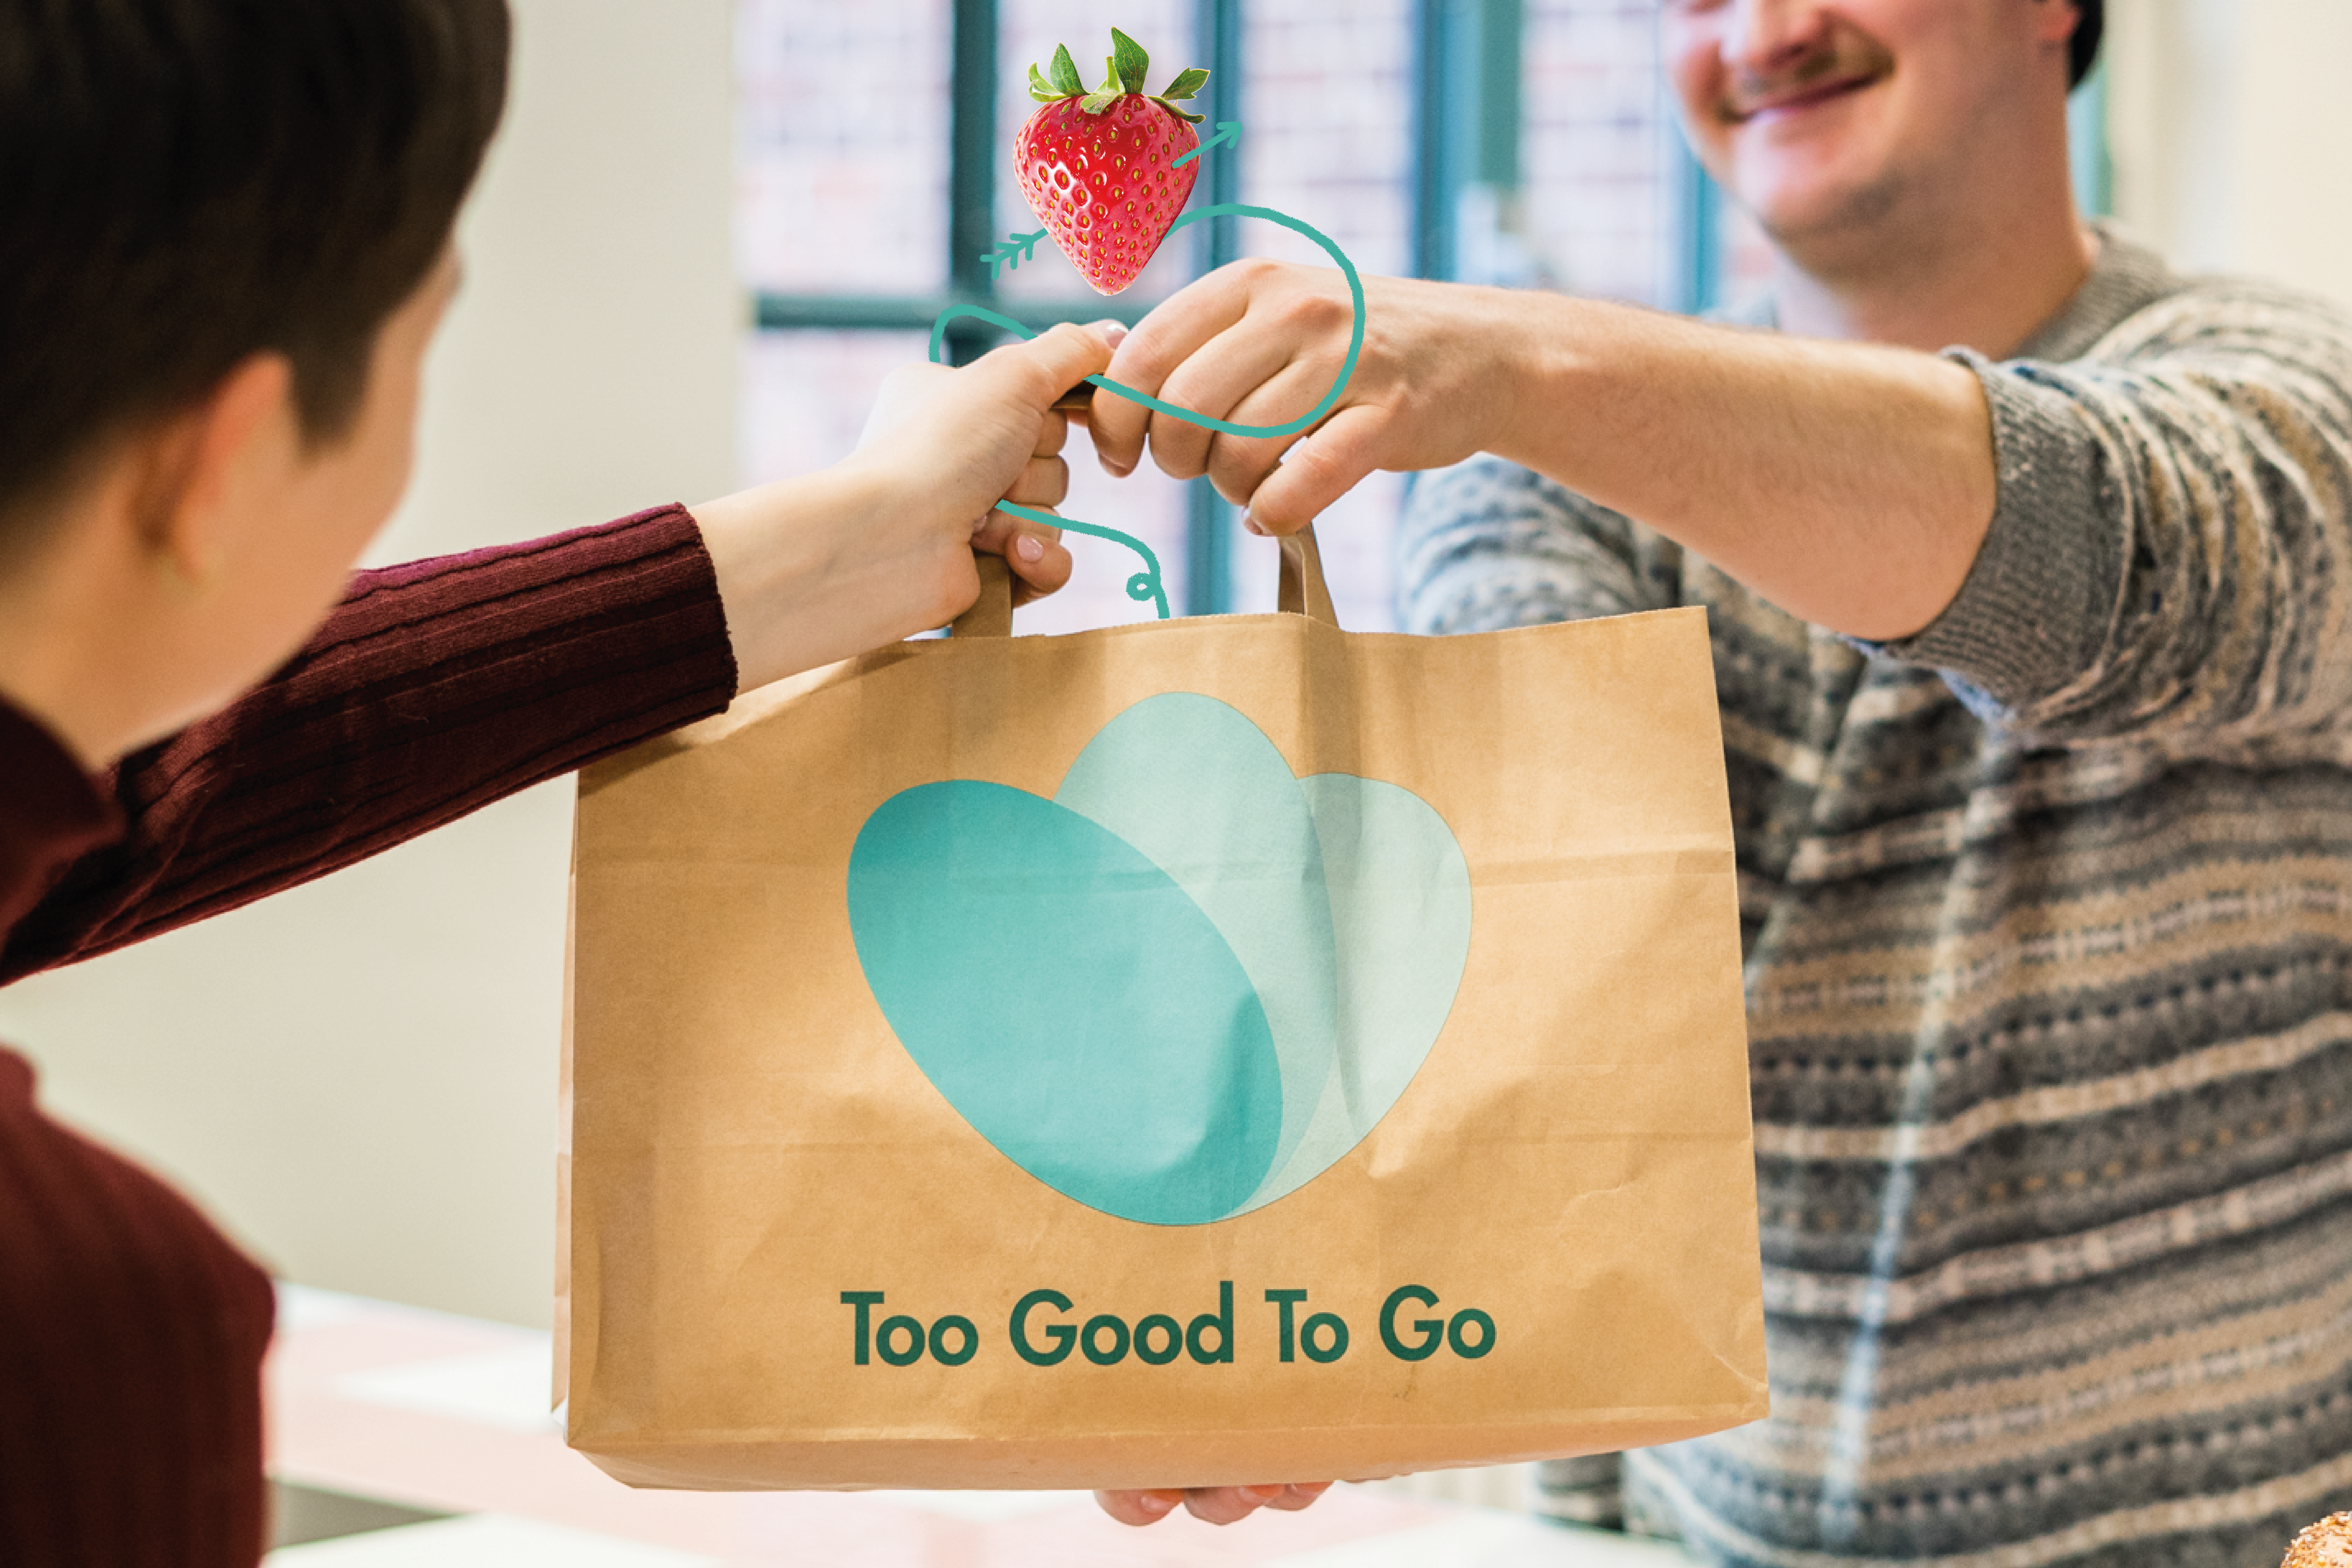 Grocery stores, we’ve been thinking: you deserve to find someone special this Valentine’s Day. Introducing a partner who will take proper care of you - and your surplus, unsold food.